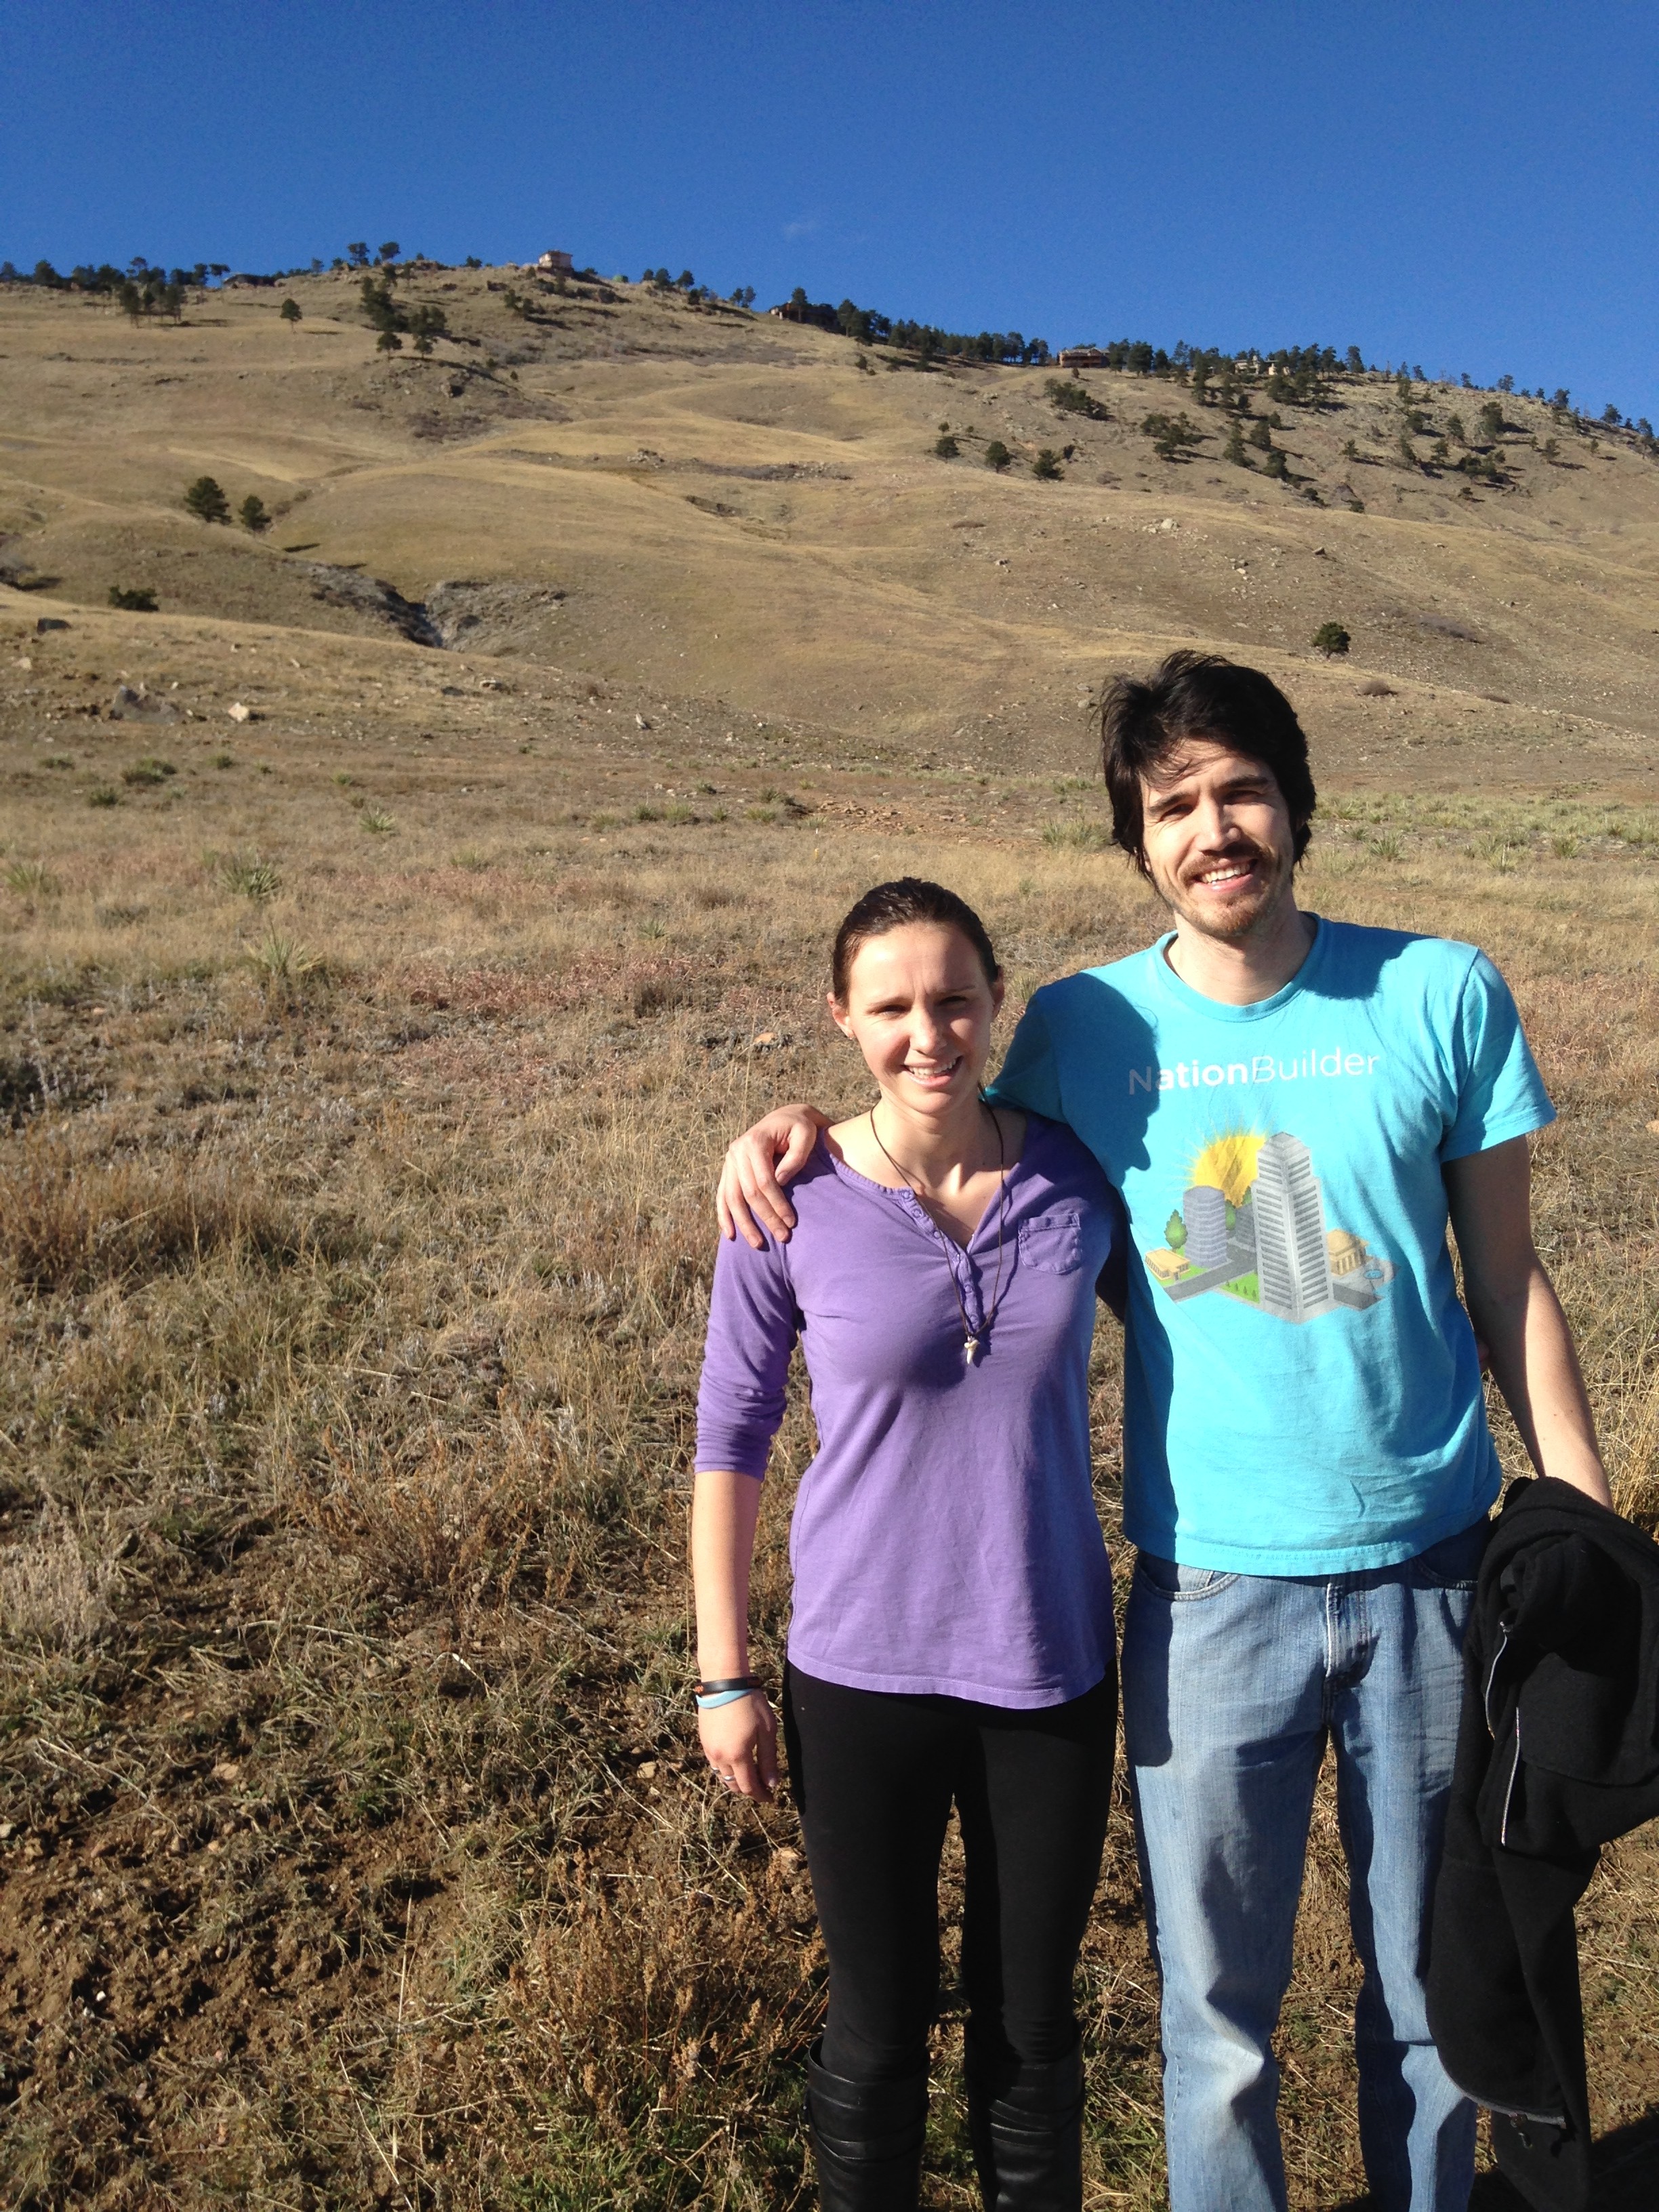 My brother and I on a hike...SQUINTY 